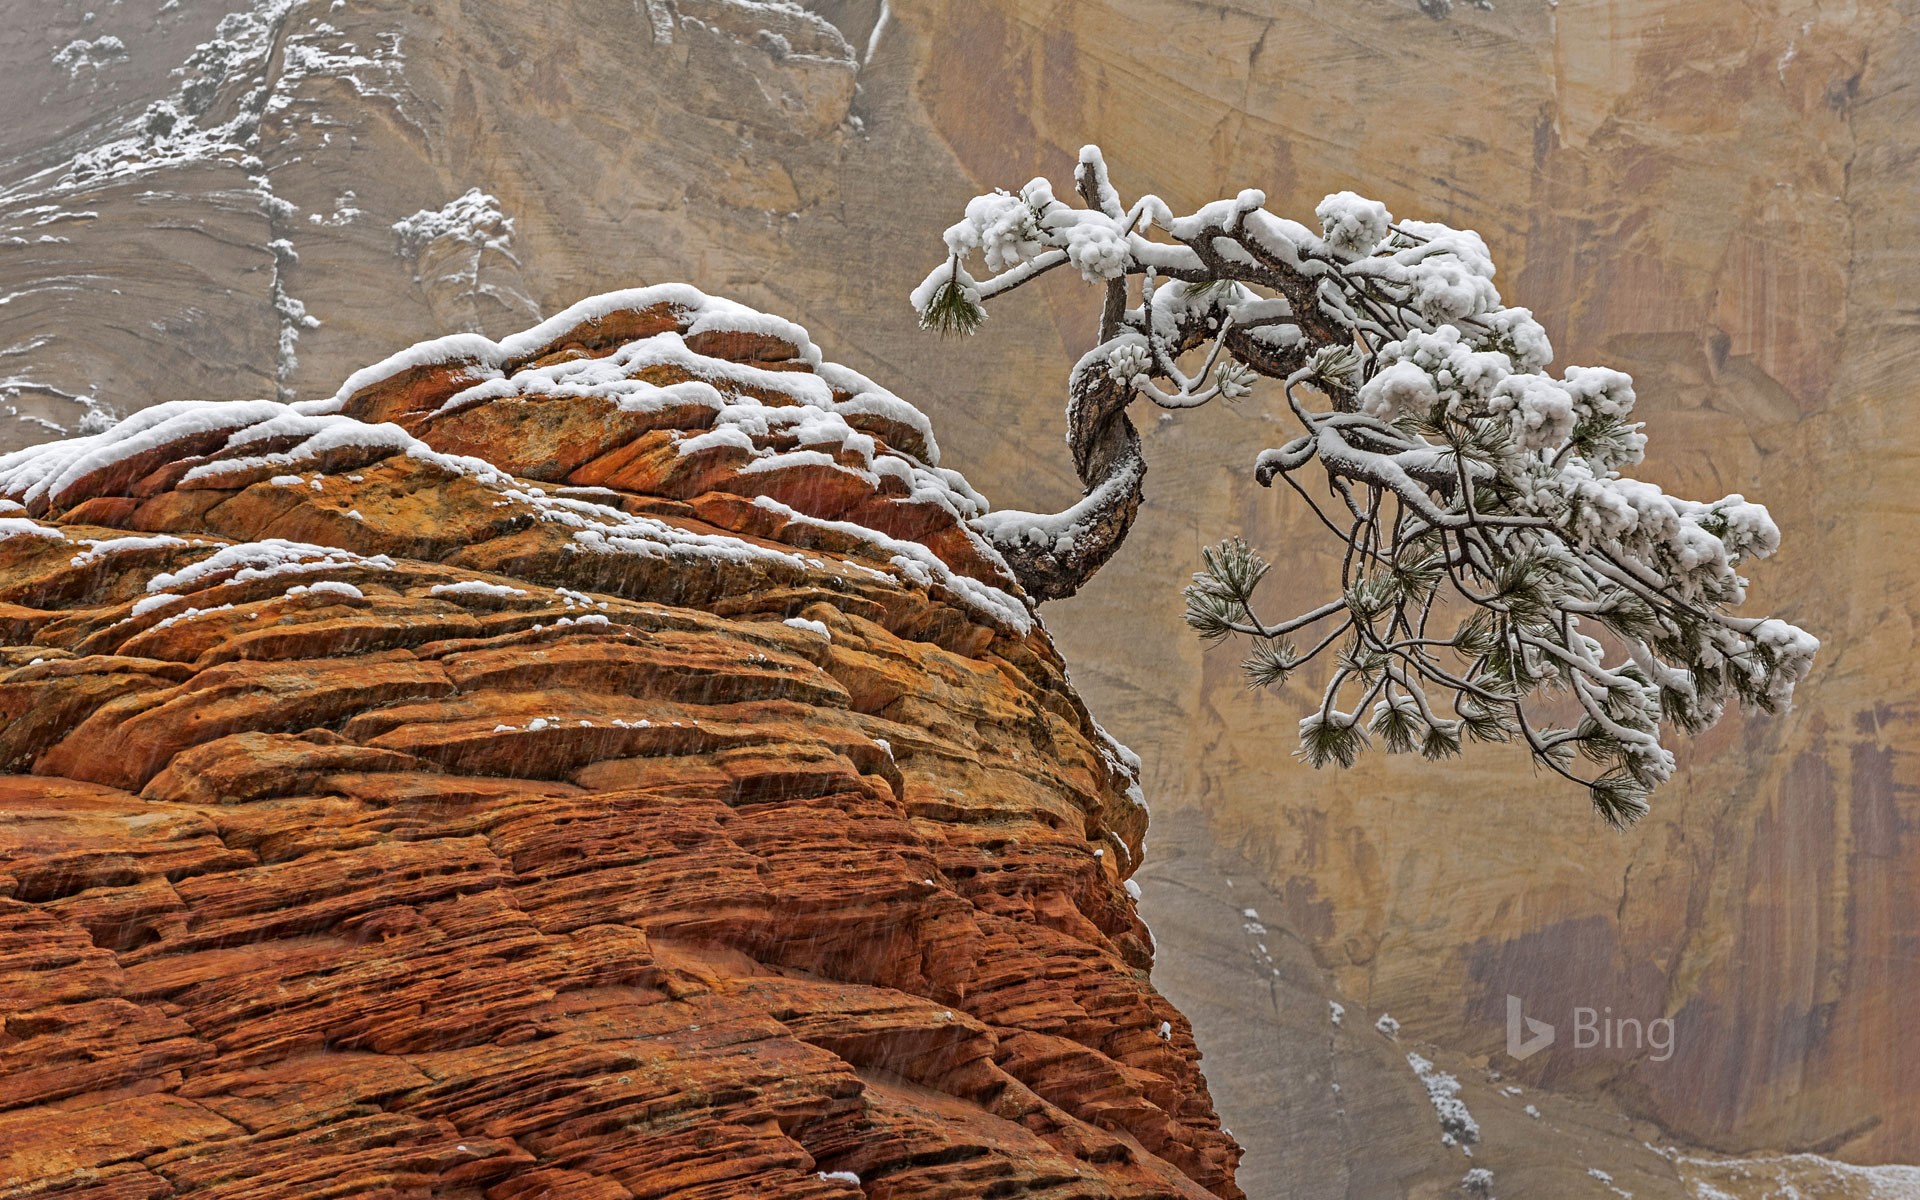 Snow in Zion National Park, Utah, USA